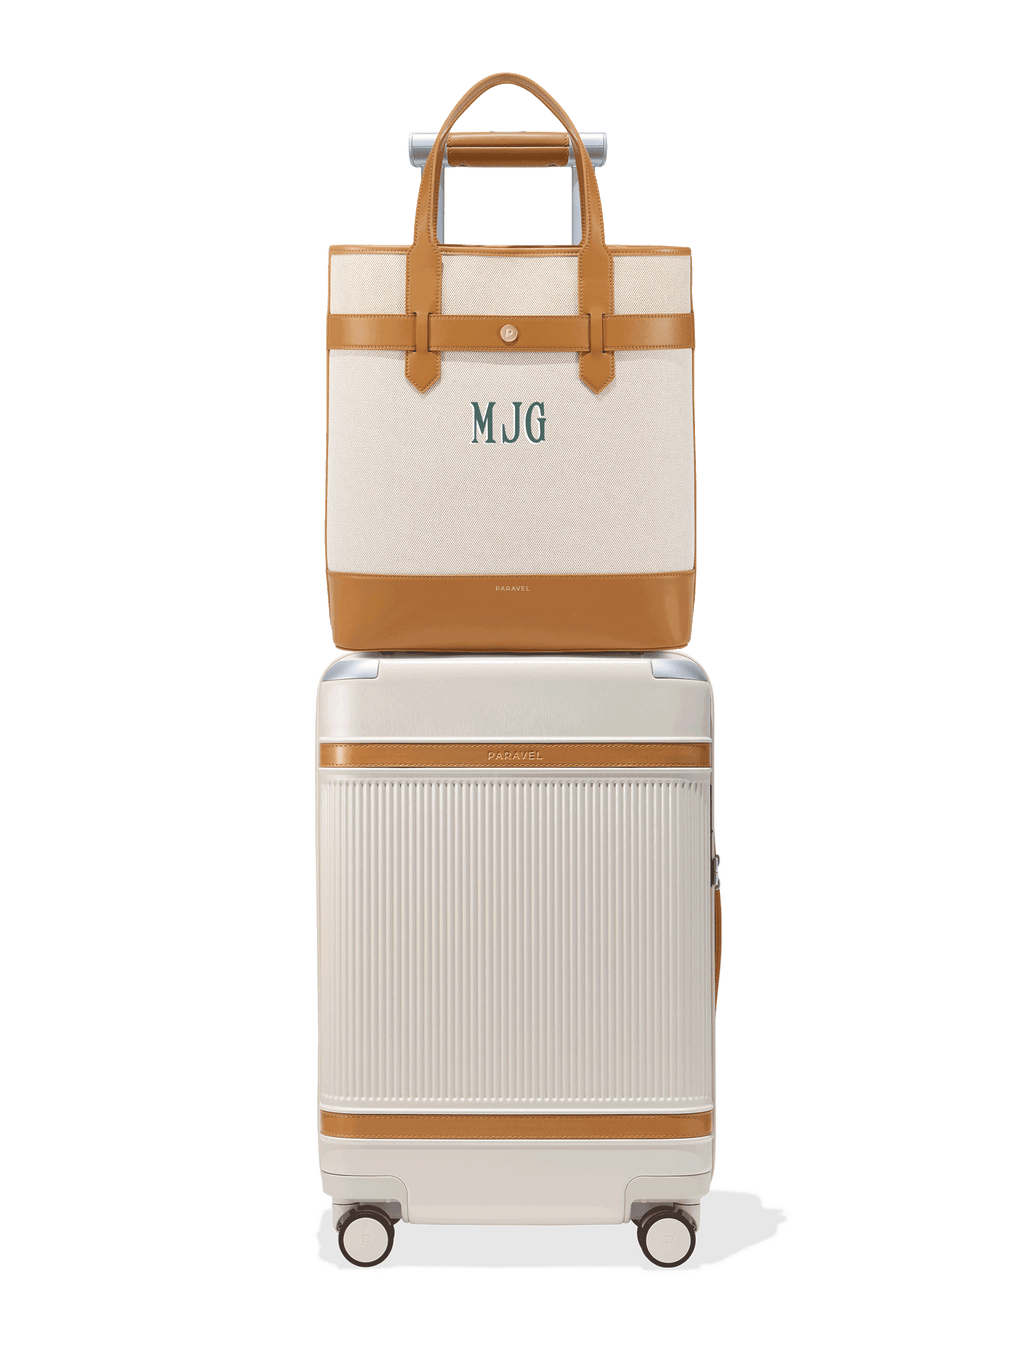  Large Capacity Tote Bag S706 (beige) : Clothing, Shoes